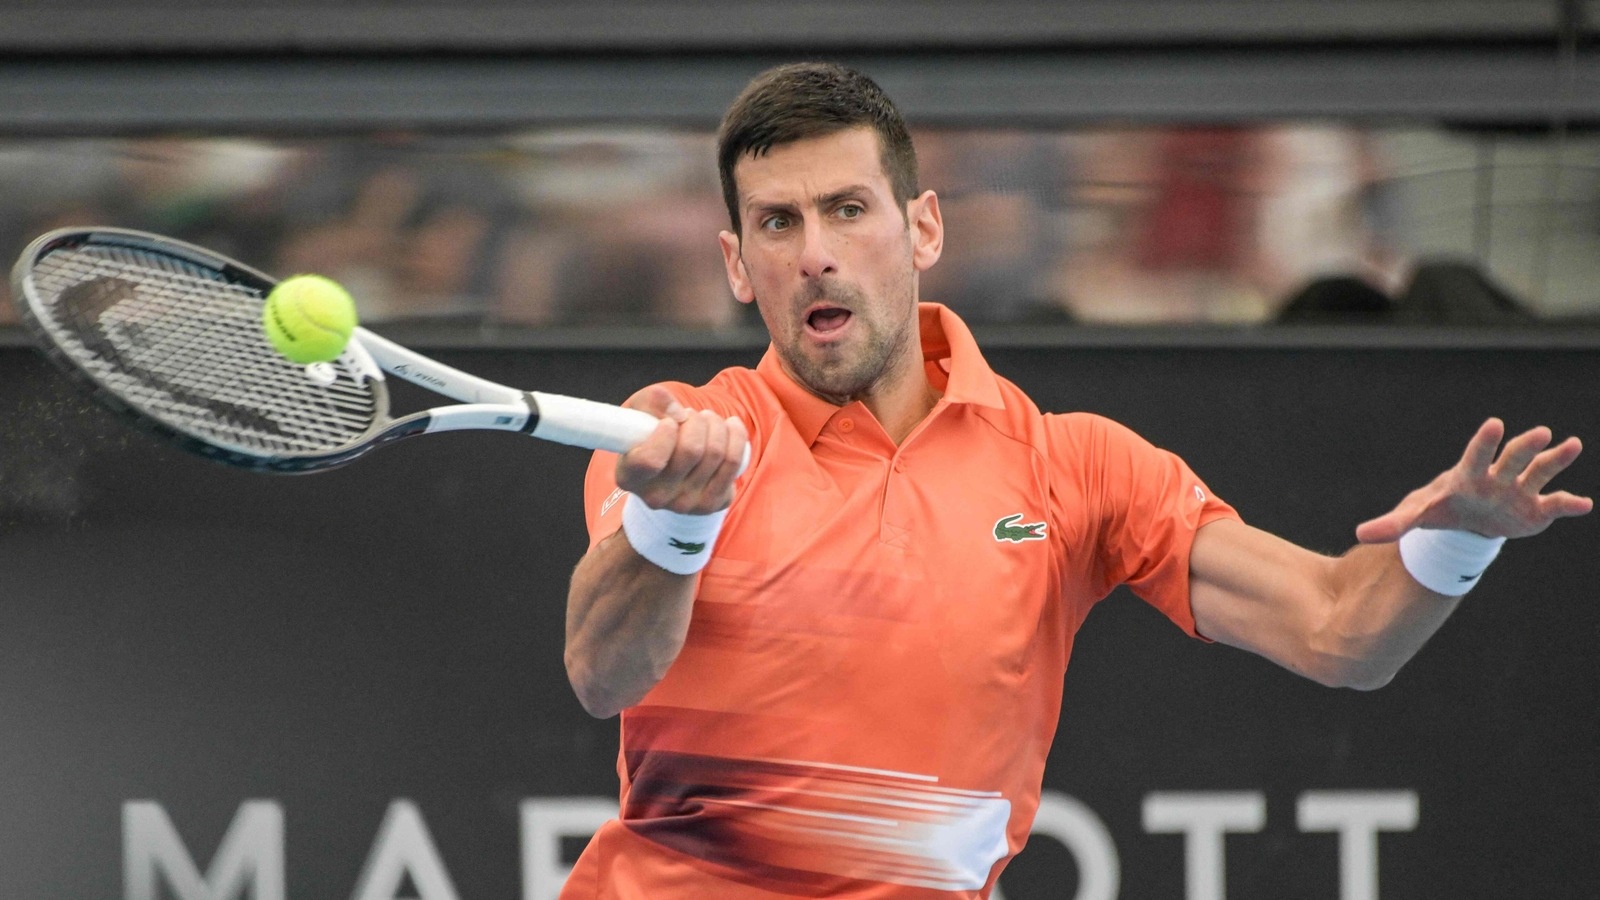 Djokovic recovers from shaky start to reach Adelaide quarters Tennis News 